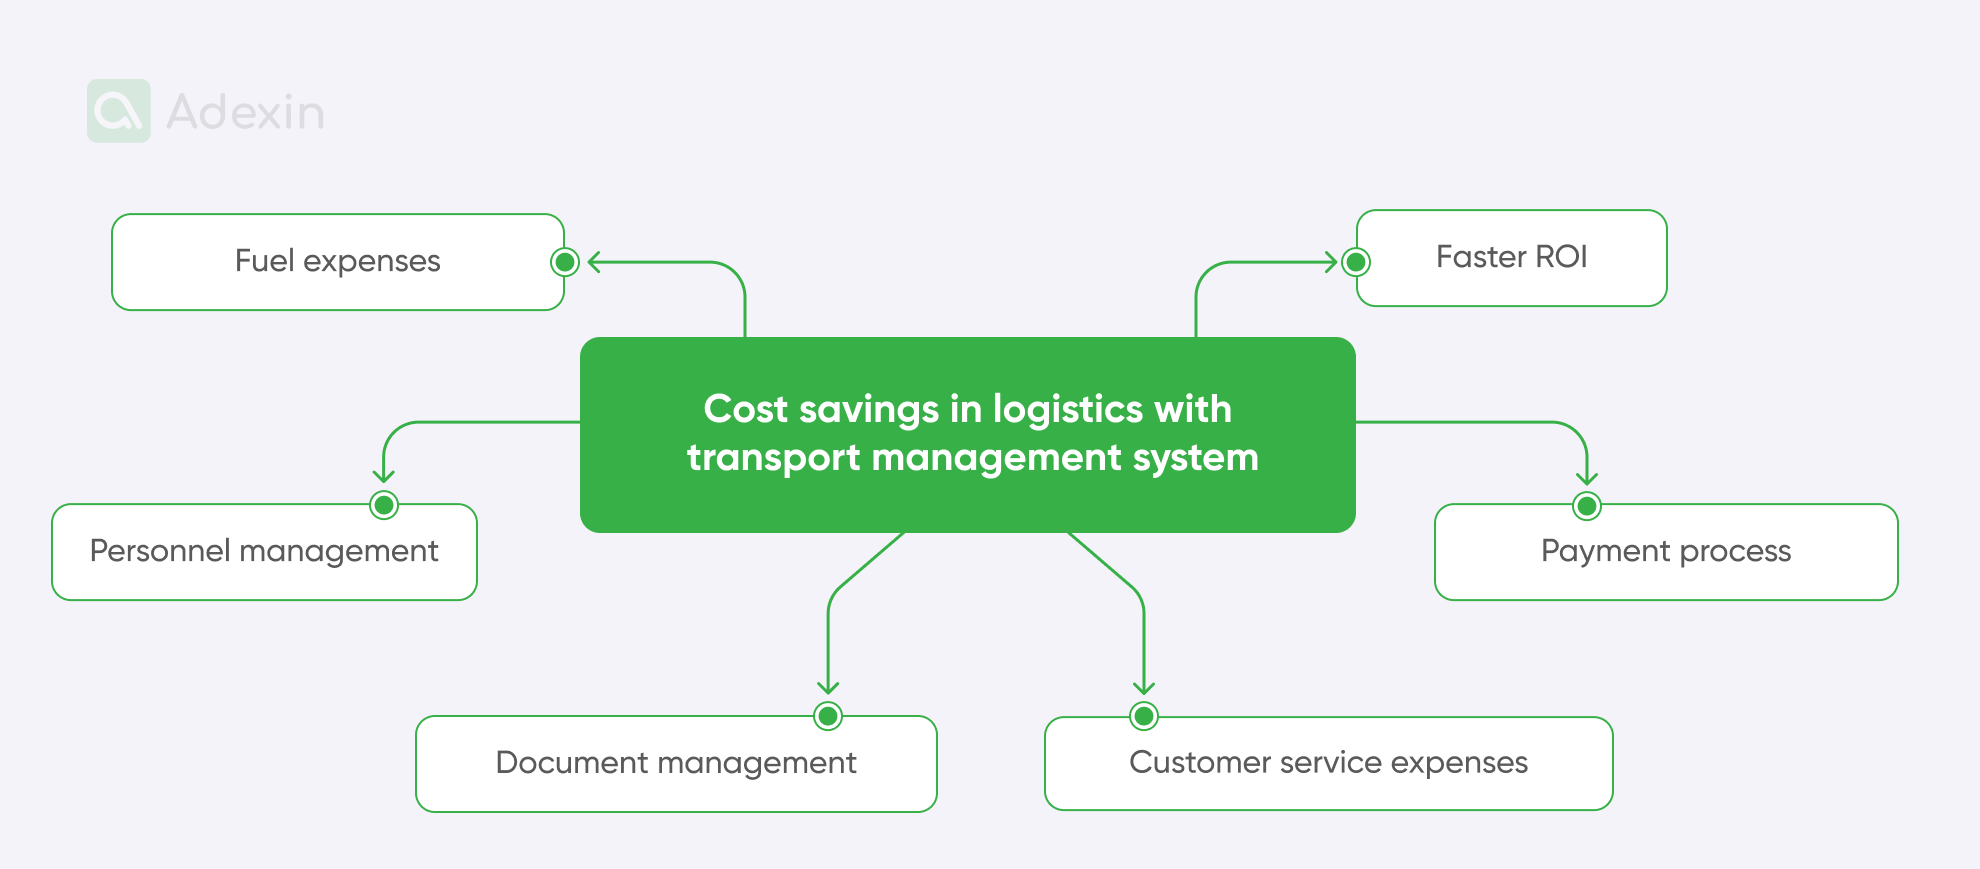 Main areas cost savings for transport management system